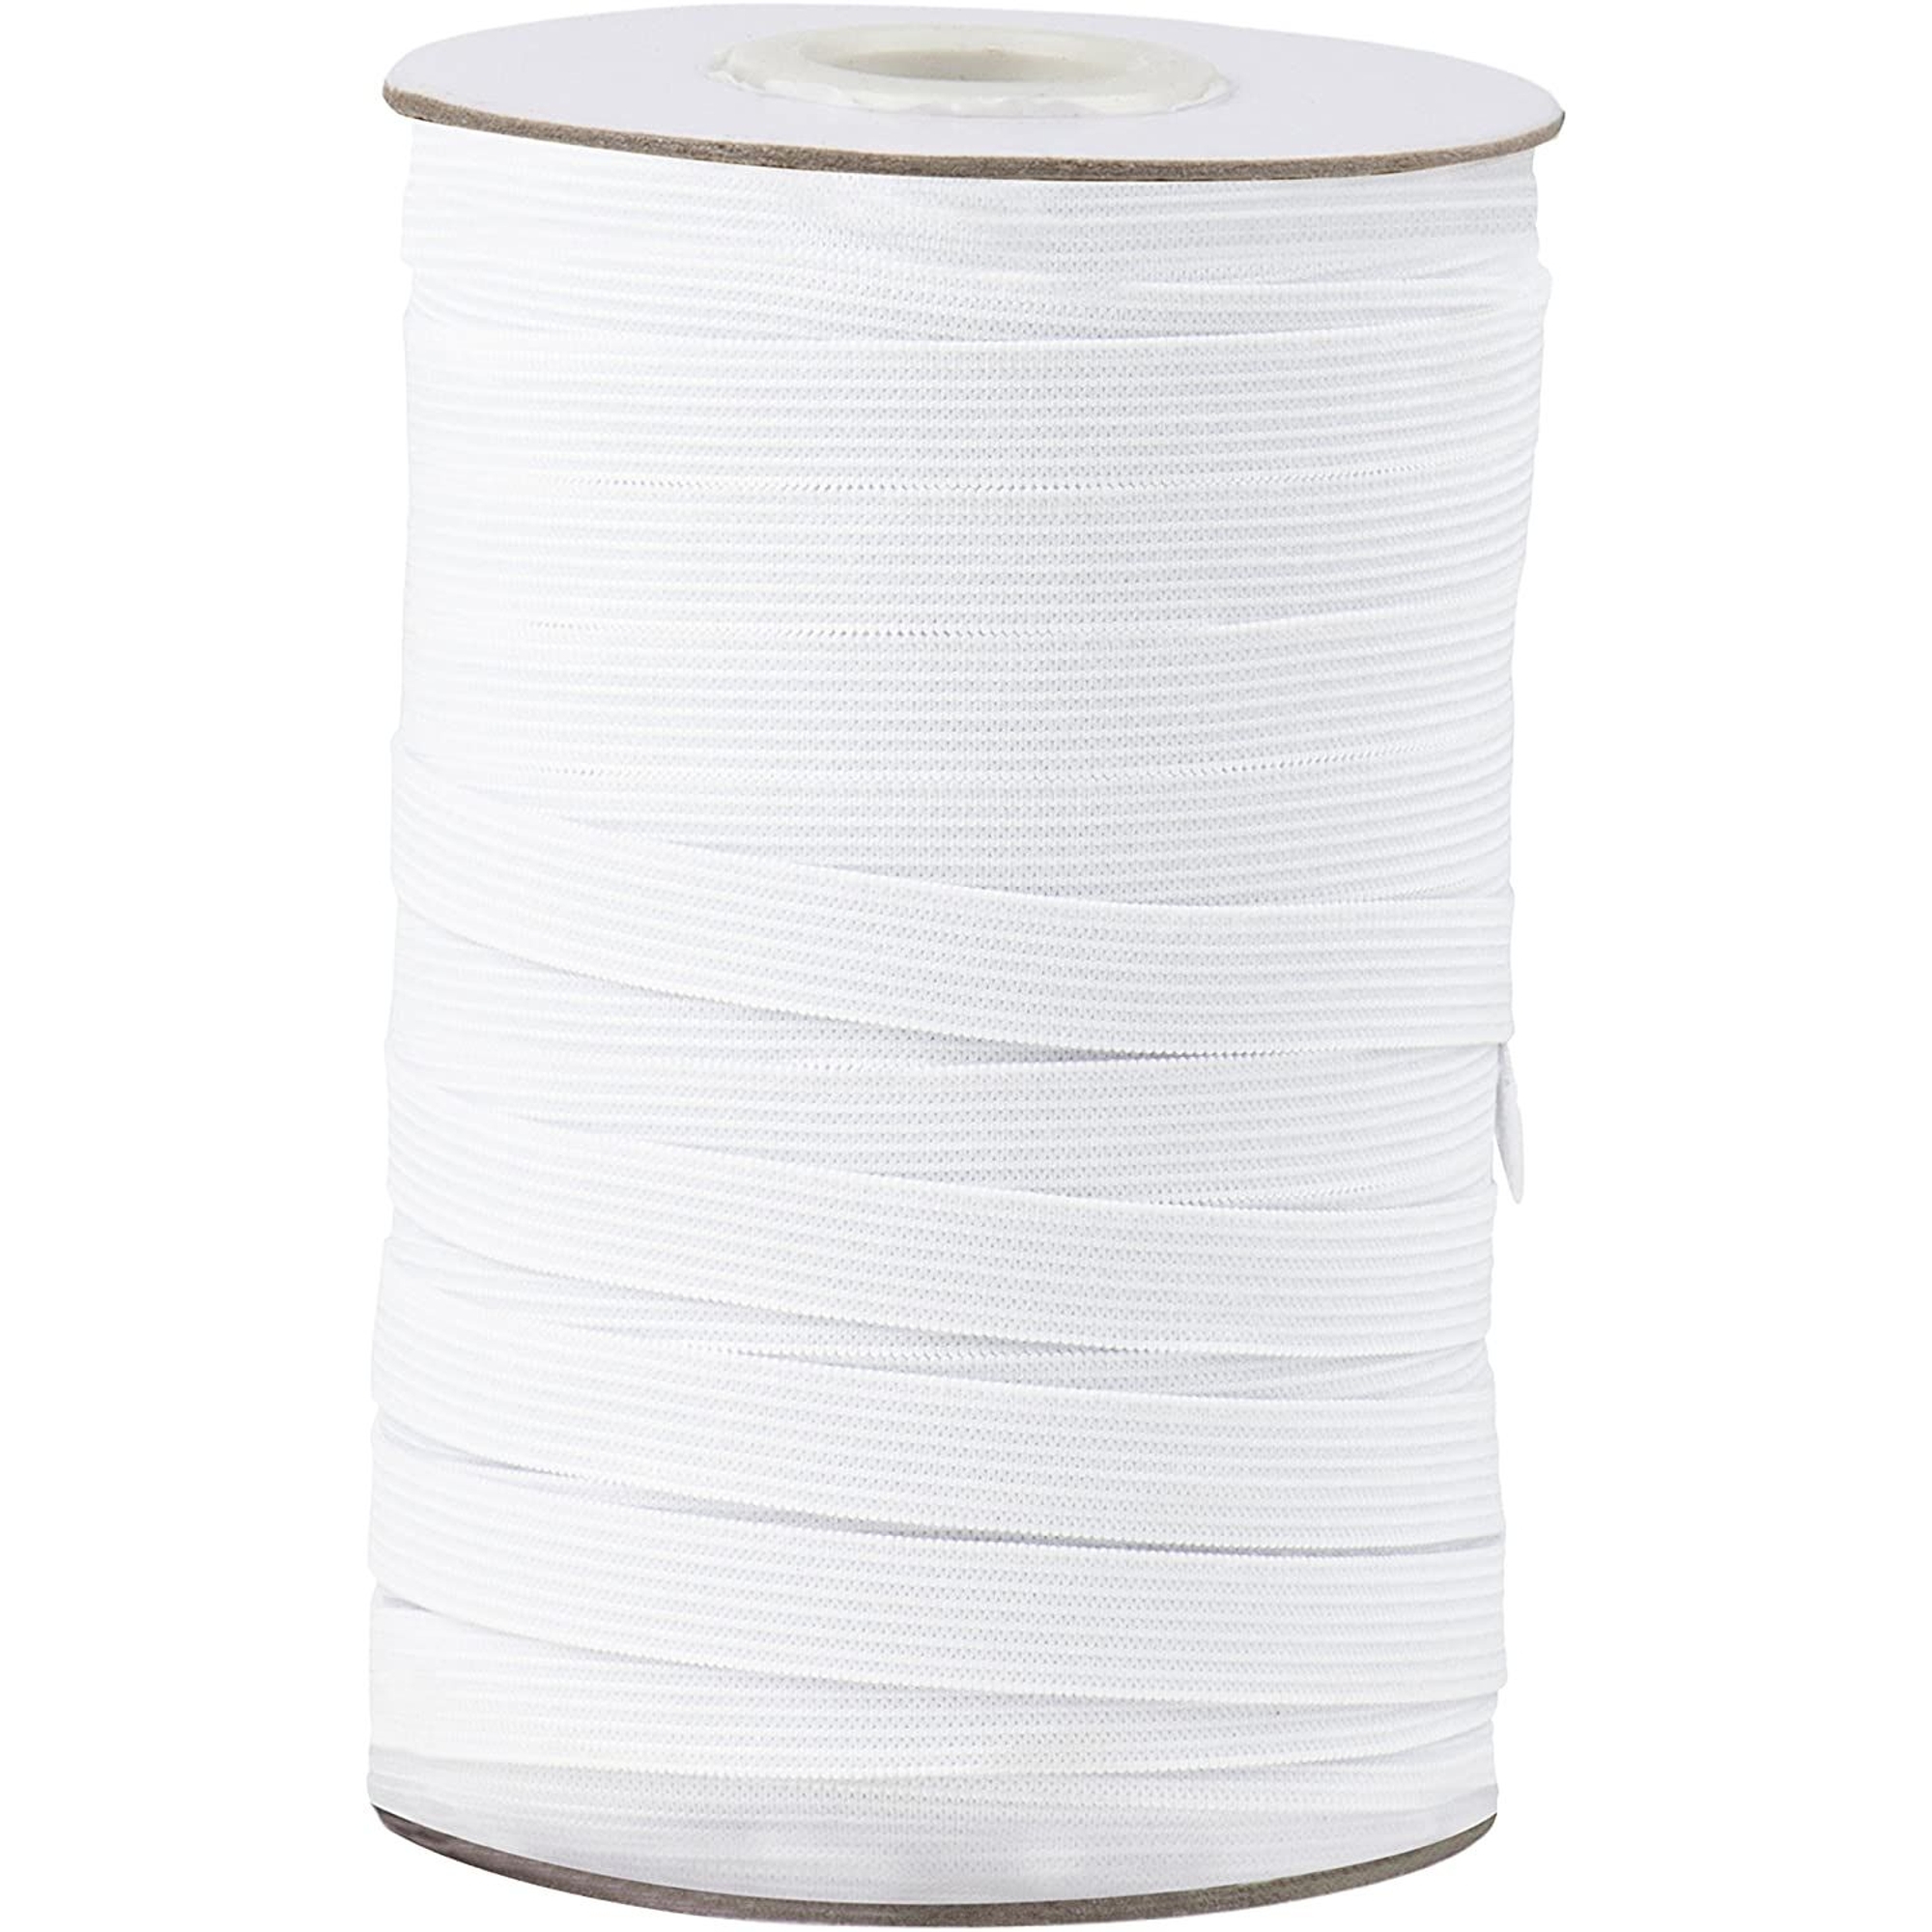 109 Yards White 1/2 Inch Elastic for Sewing Clothes, Stretch Knit Bands for  DIY Crafts